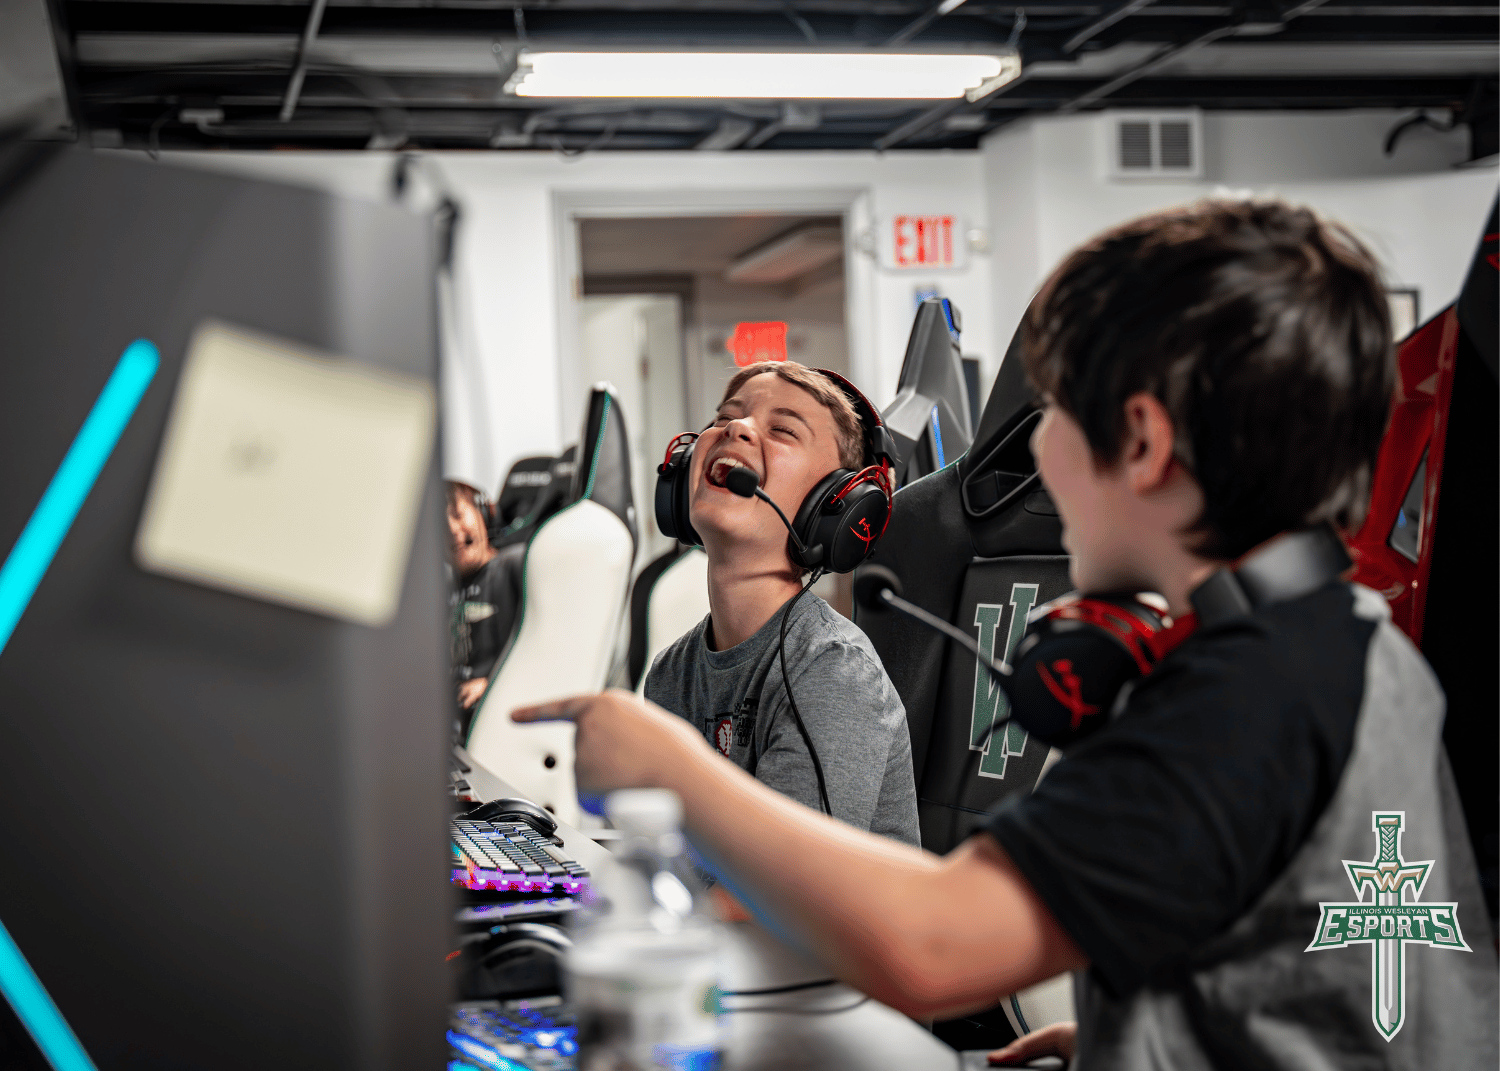 Children laugh together with headsets on as they play video games on computers in IWU's esports facility